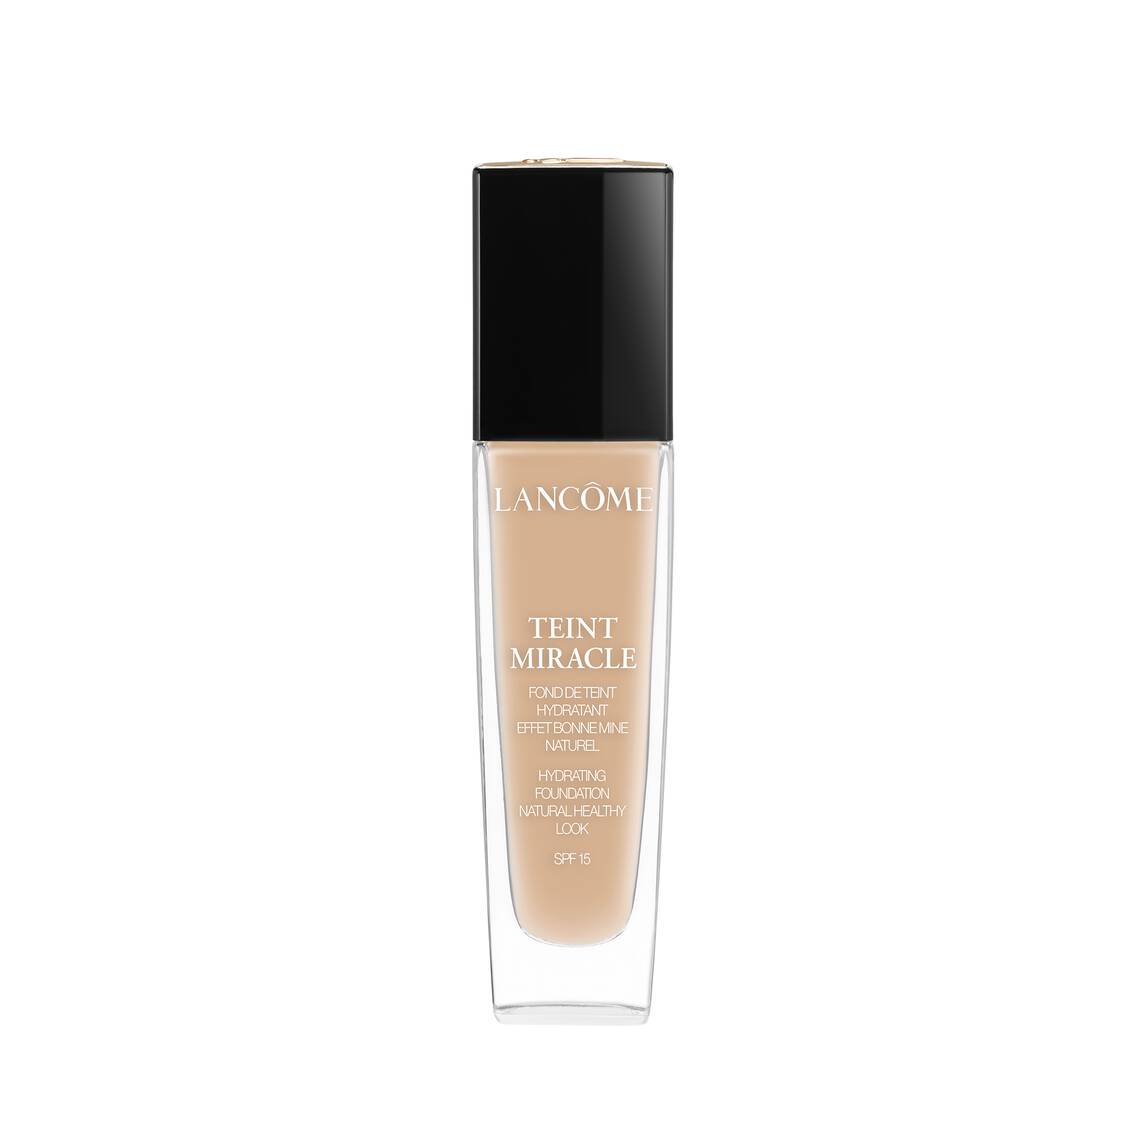 Lancome Teint Miracle Foundation 035